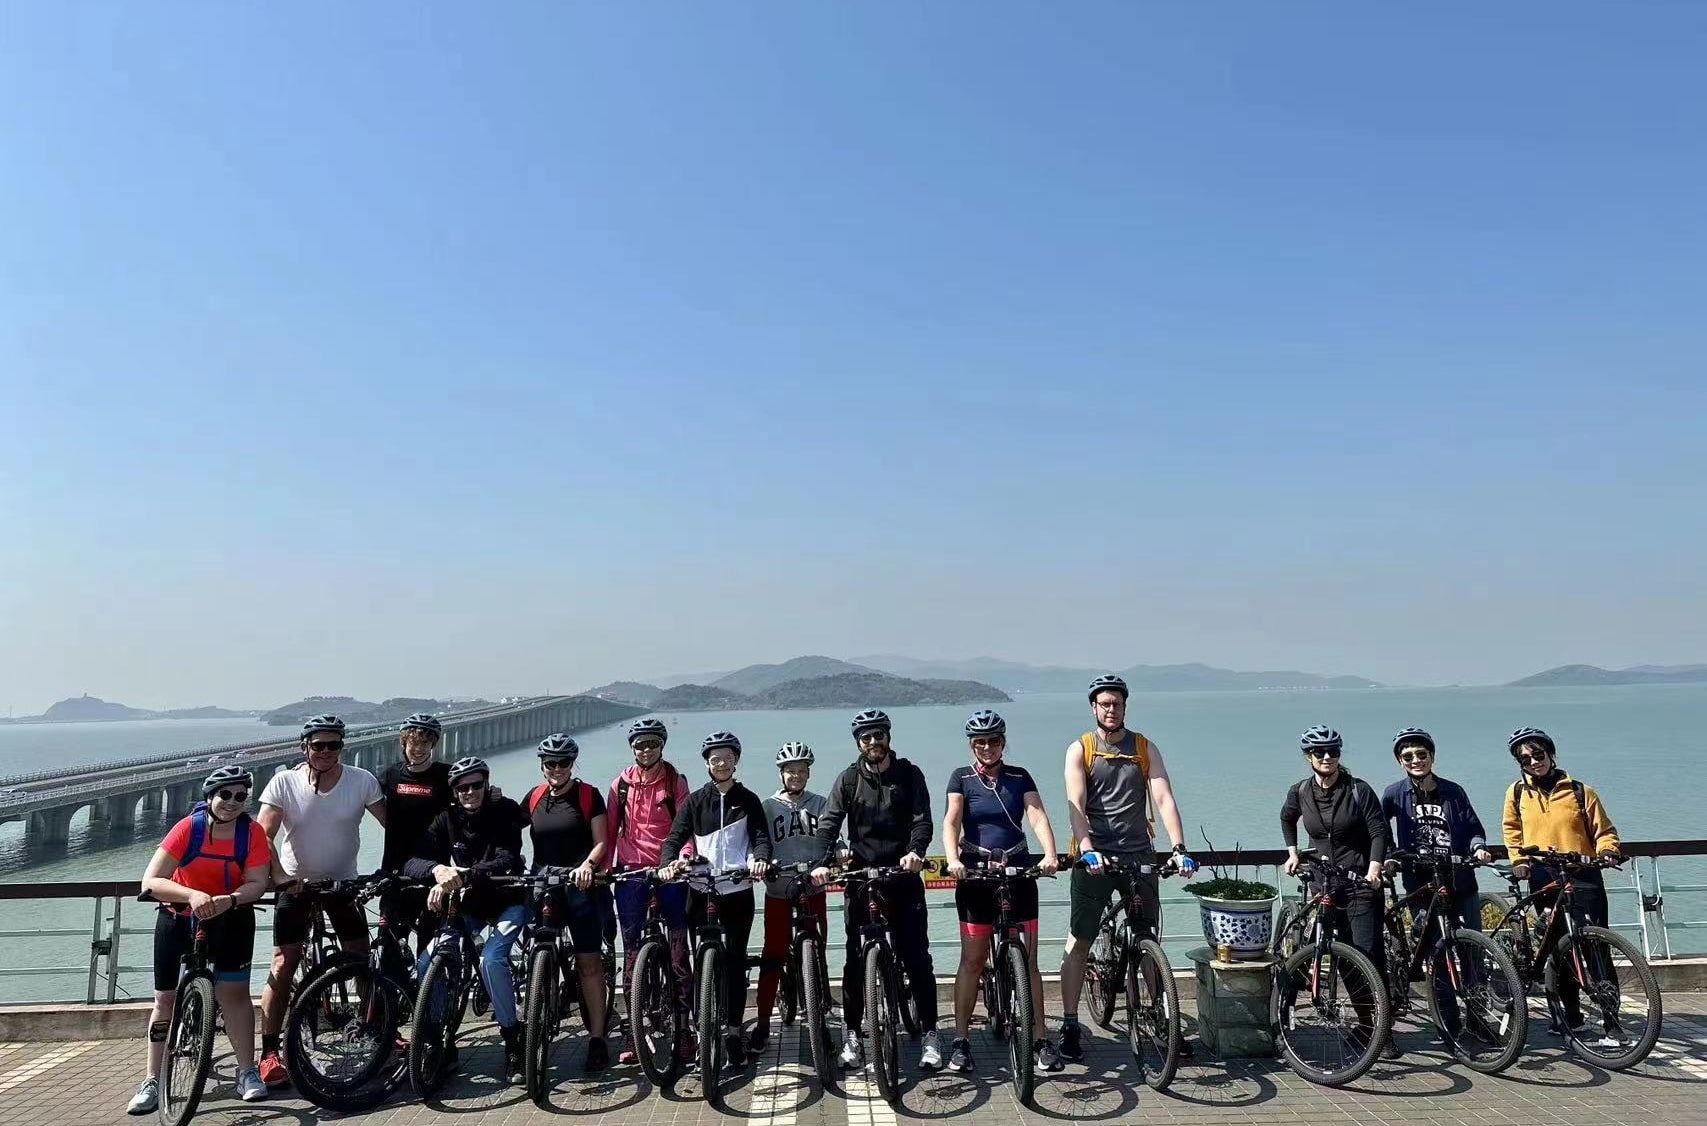 bike tour in Xishan Island, the largest island of Lake Tai. Tour departing from Shanghai